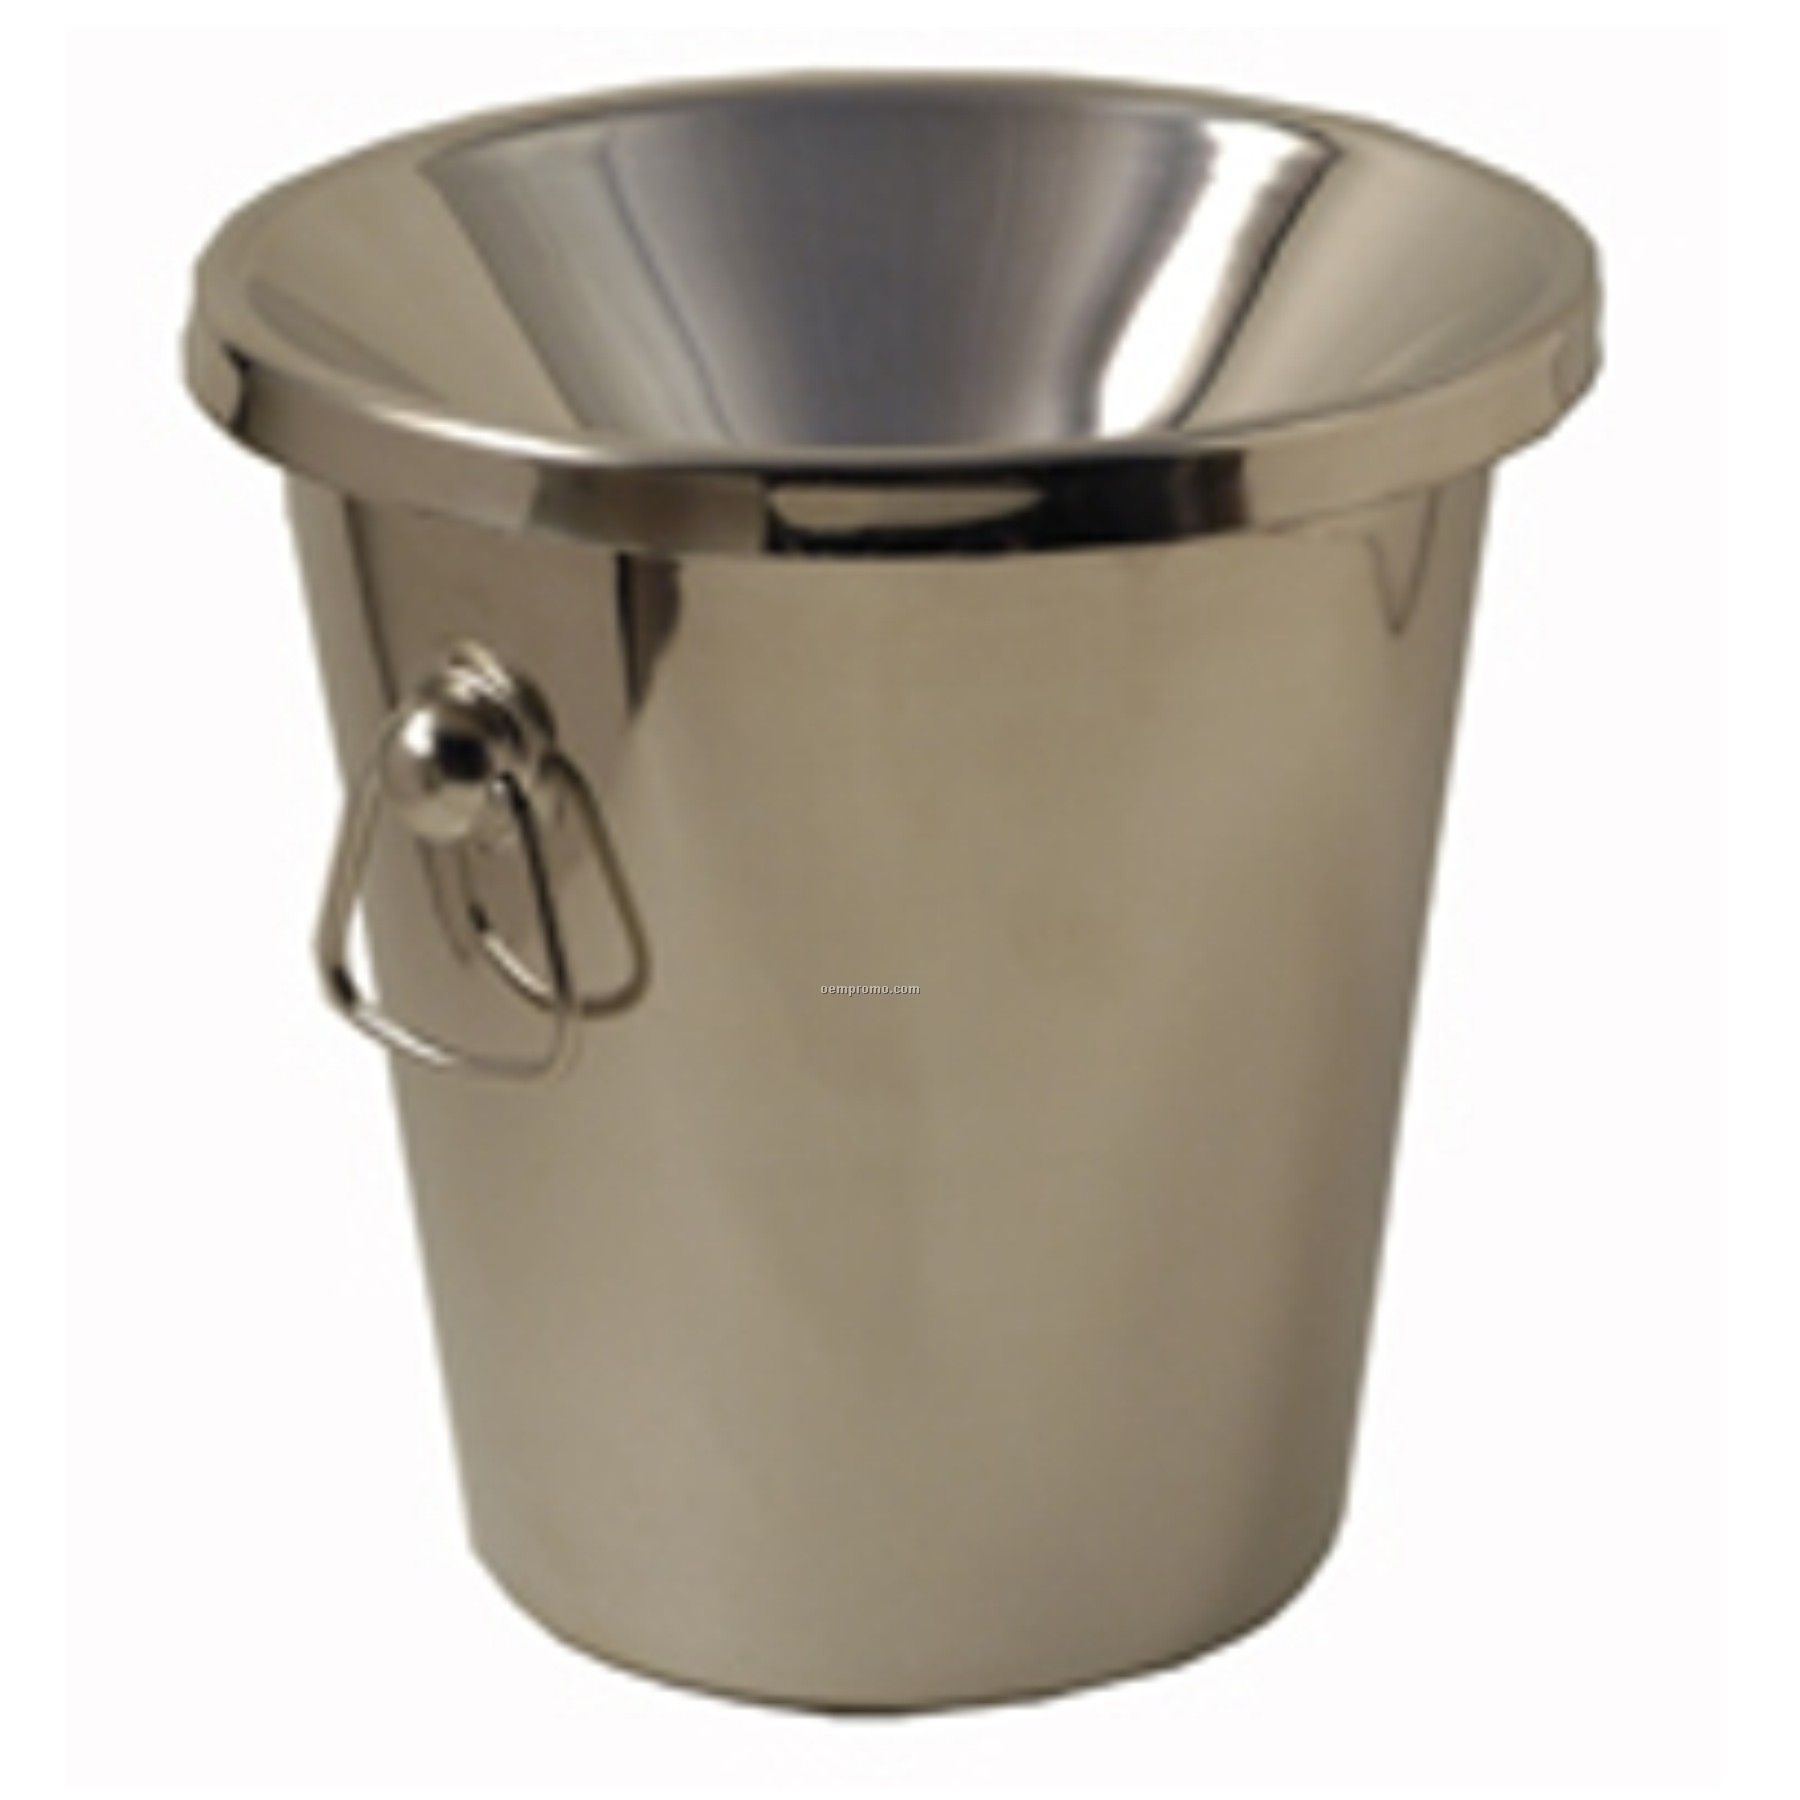 Stainless Steel Wine Tasting Receptacle/Spittoon With Lid- No Imprint